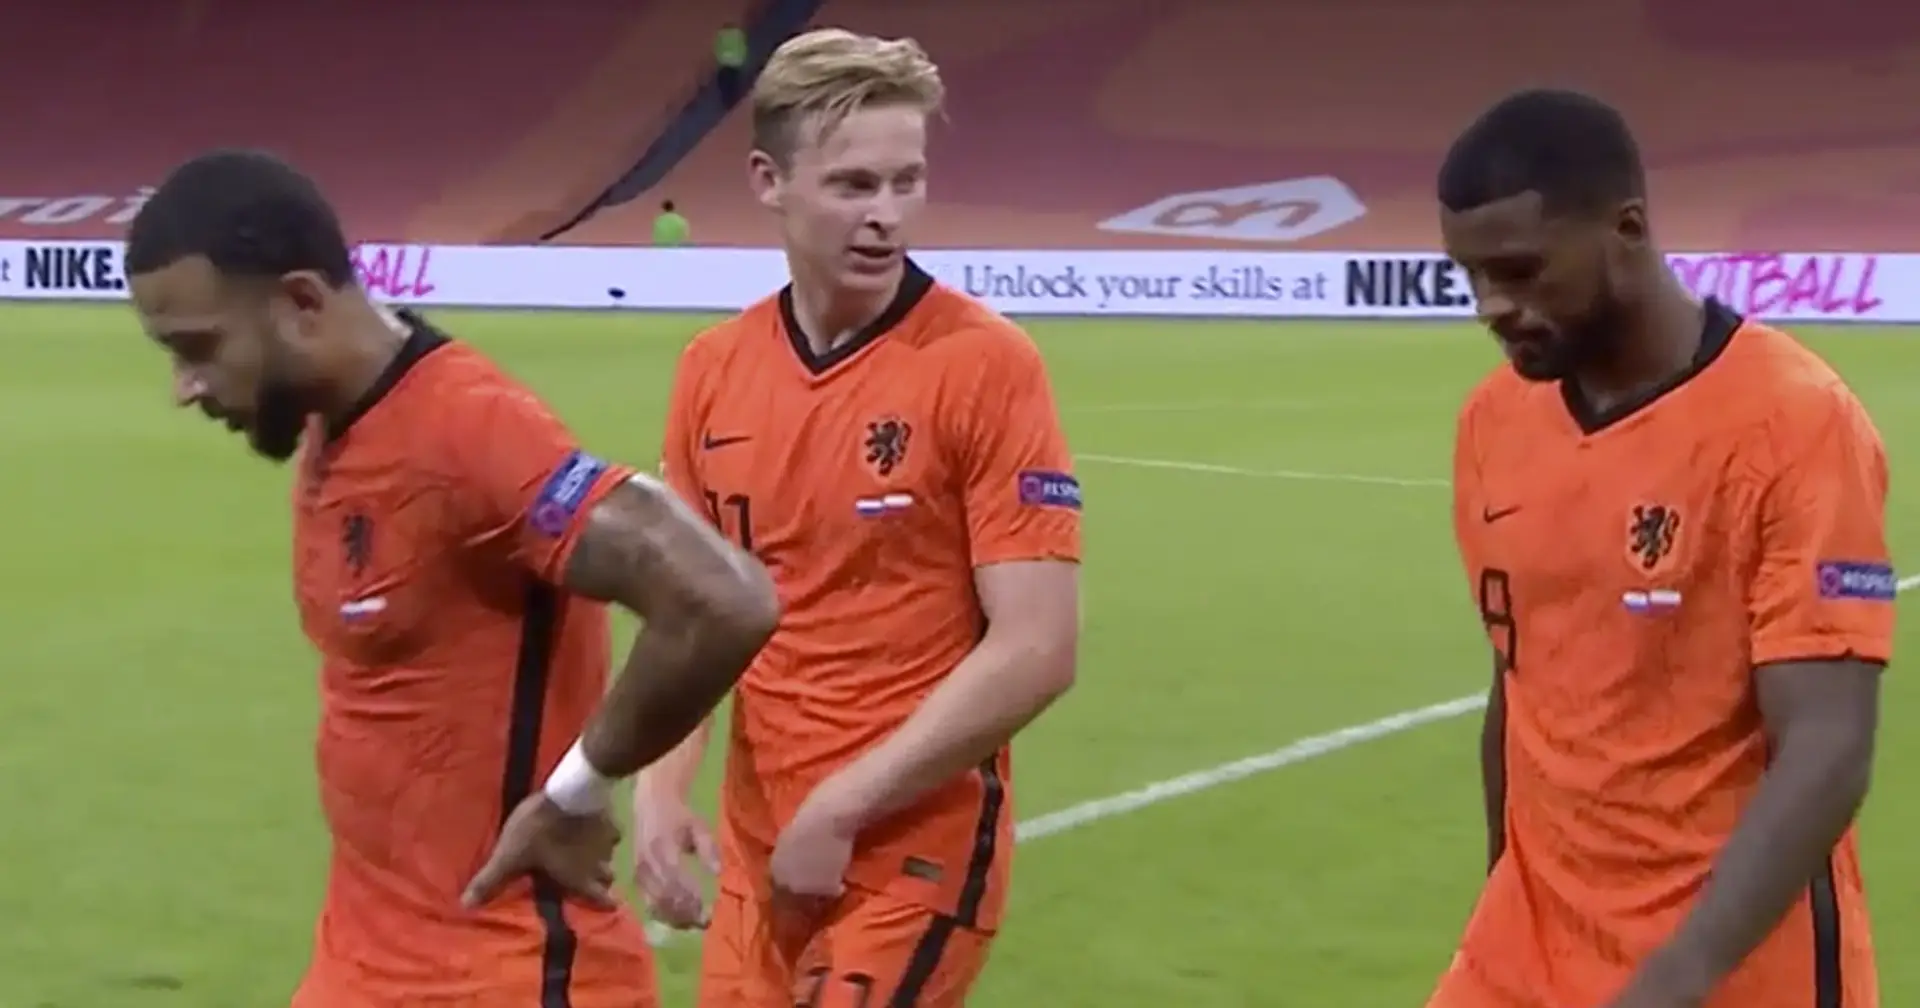 Barca's new trio in the making? De Jong, Wijnaldum and Depay seen leaving pitch altogether ahead of possible Barca link-up